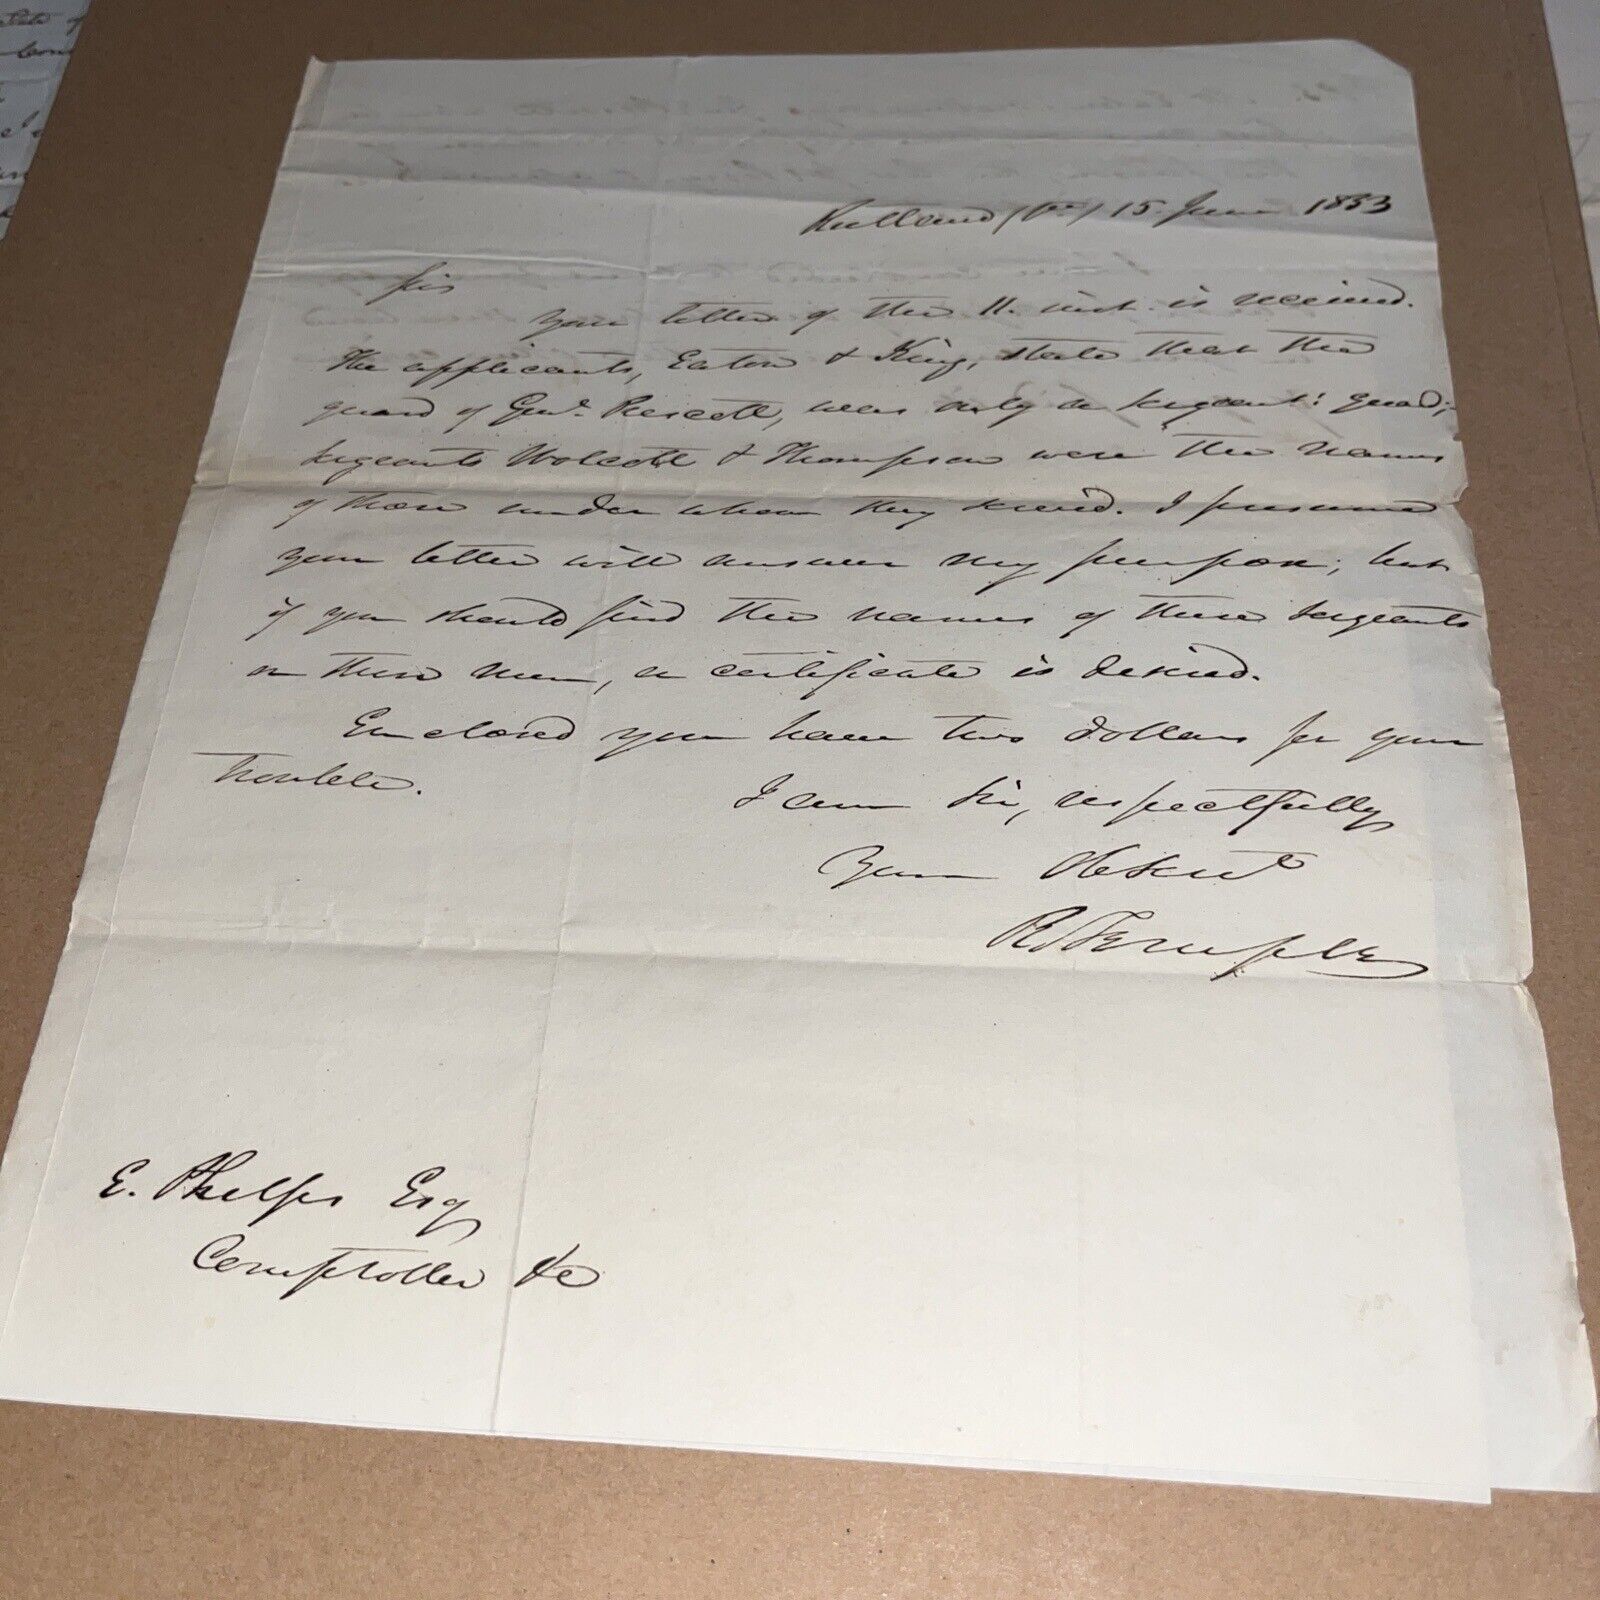 1833 Letter to Elisha Phelps Connecticut Comptroller Mentions Wolcott Thompson